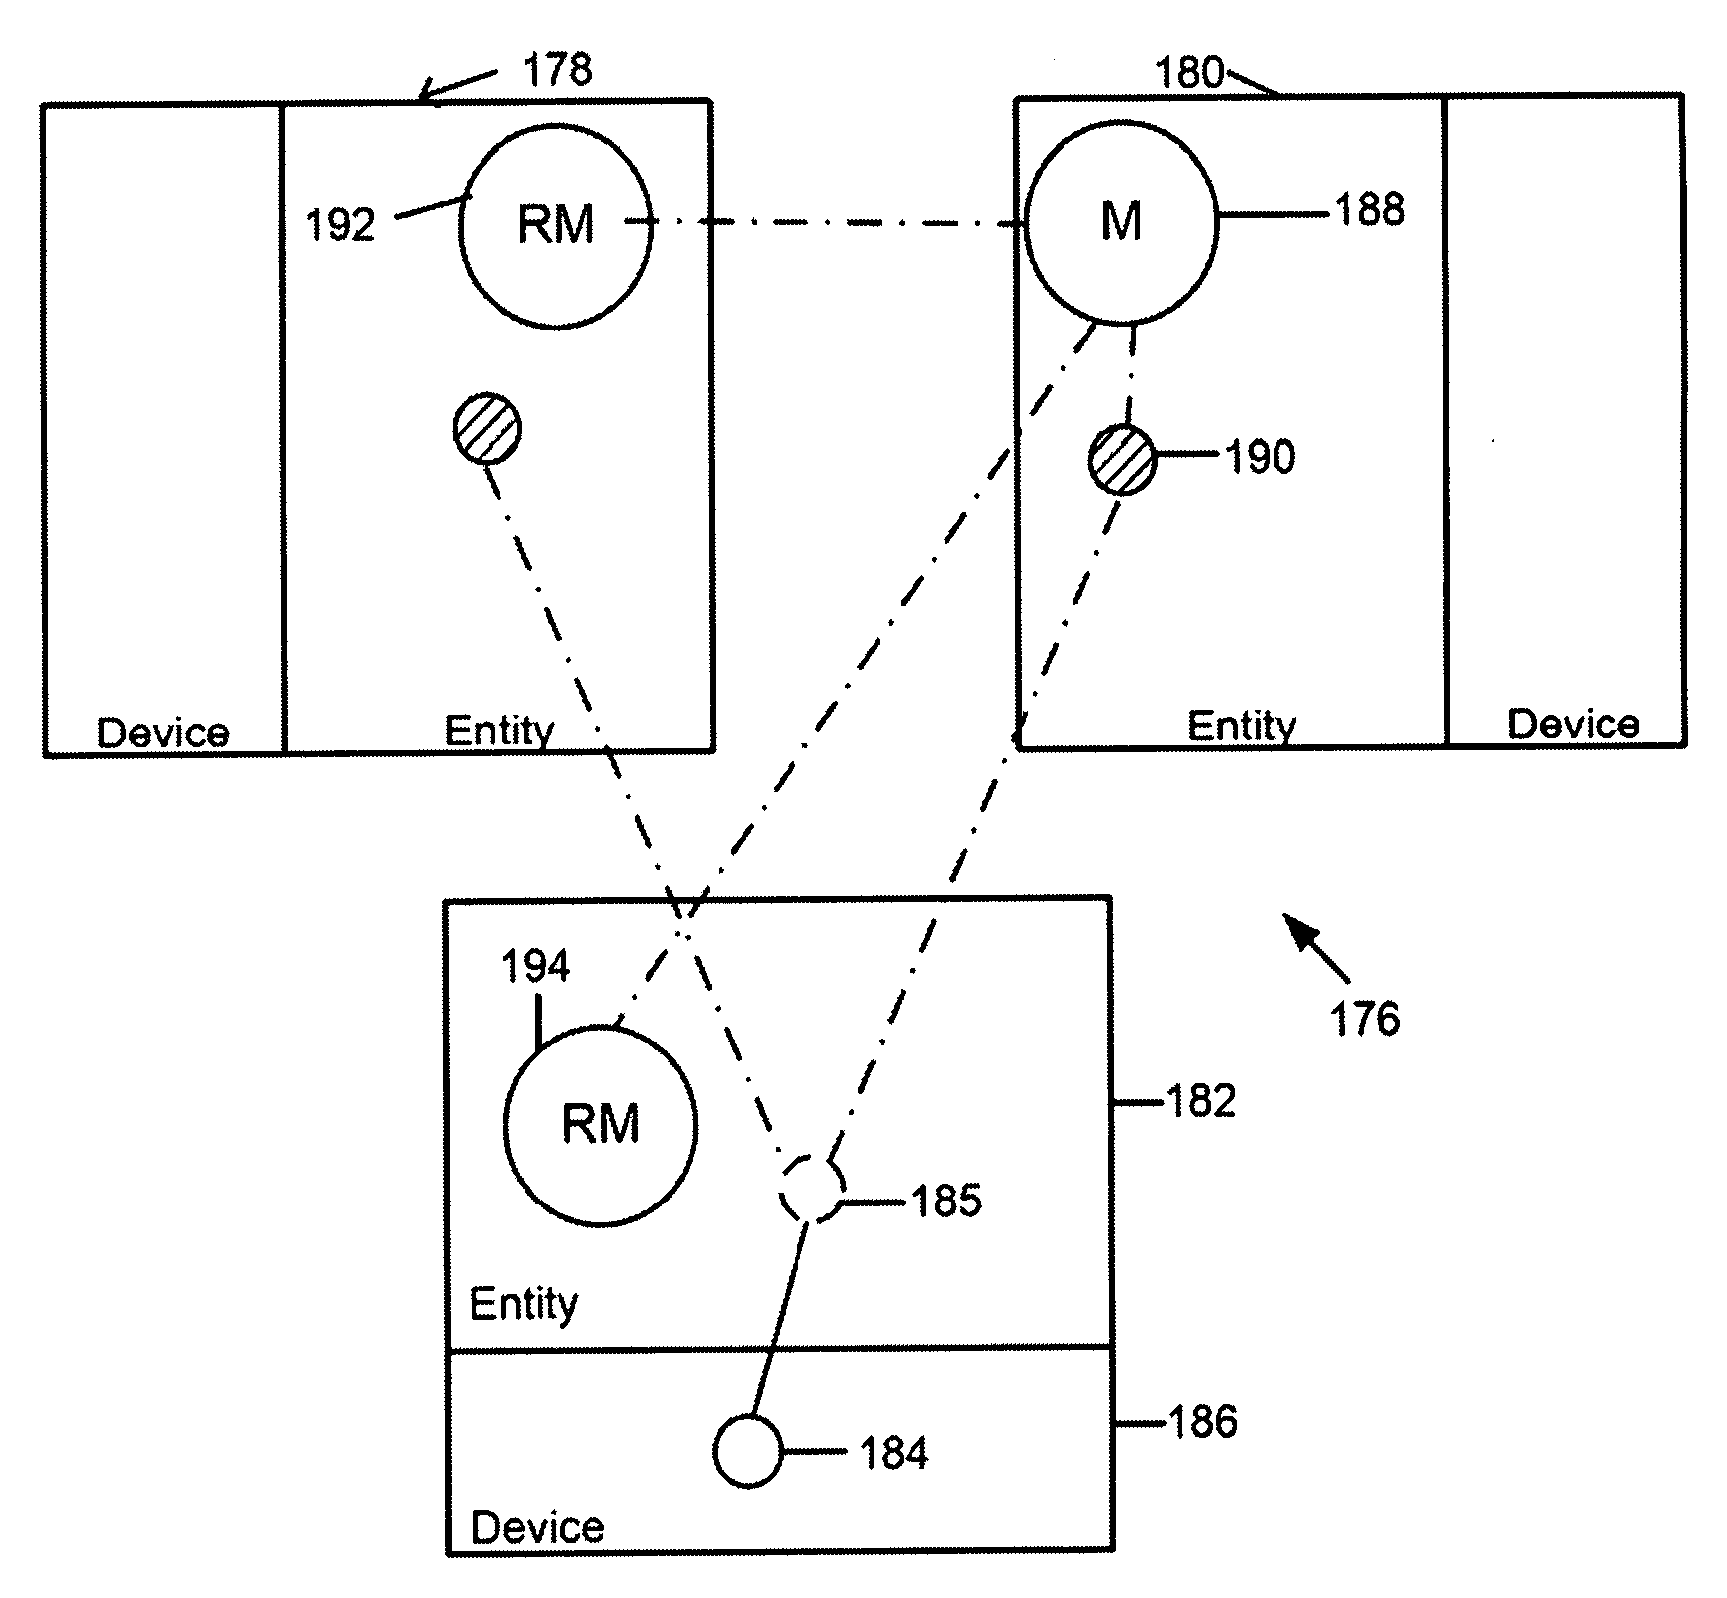 Method for sharing functionality and/or data between two or more linked entities